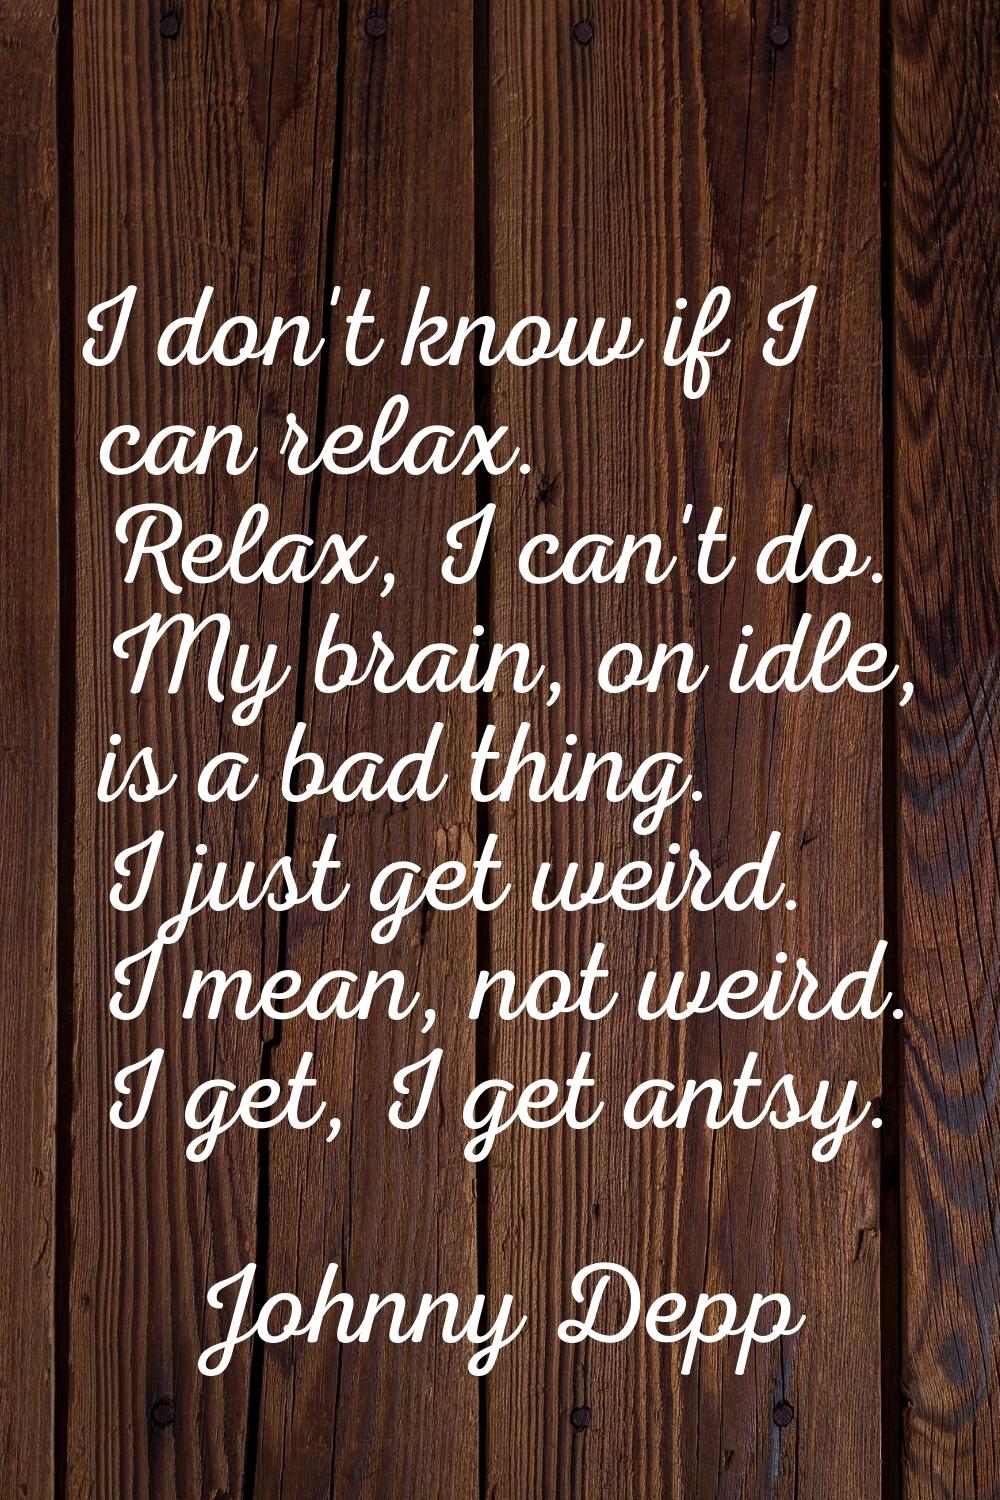 I don't know if I can relax. Relax, I can't do. My brain, on idle, is a bad thing. I just get weird